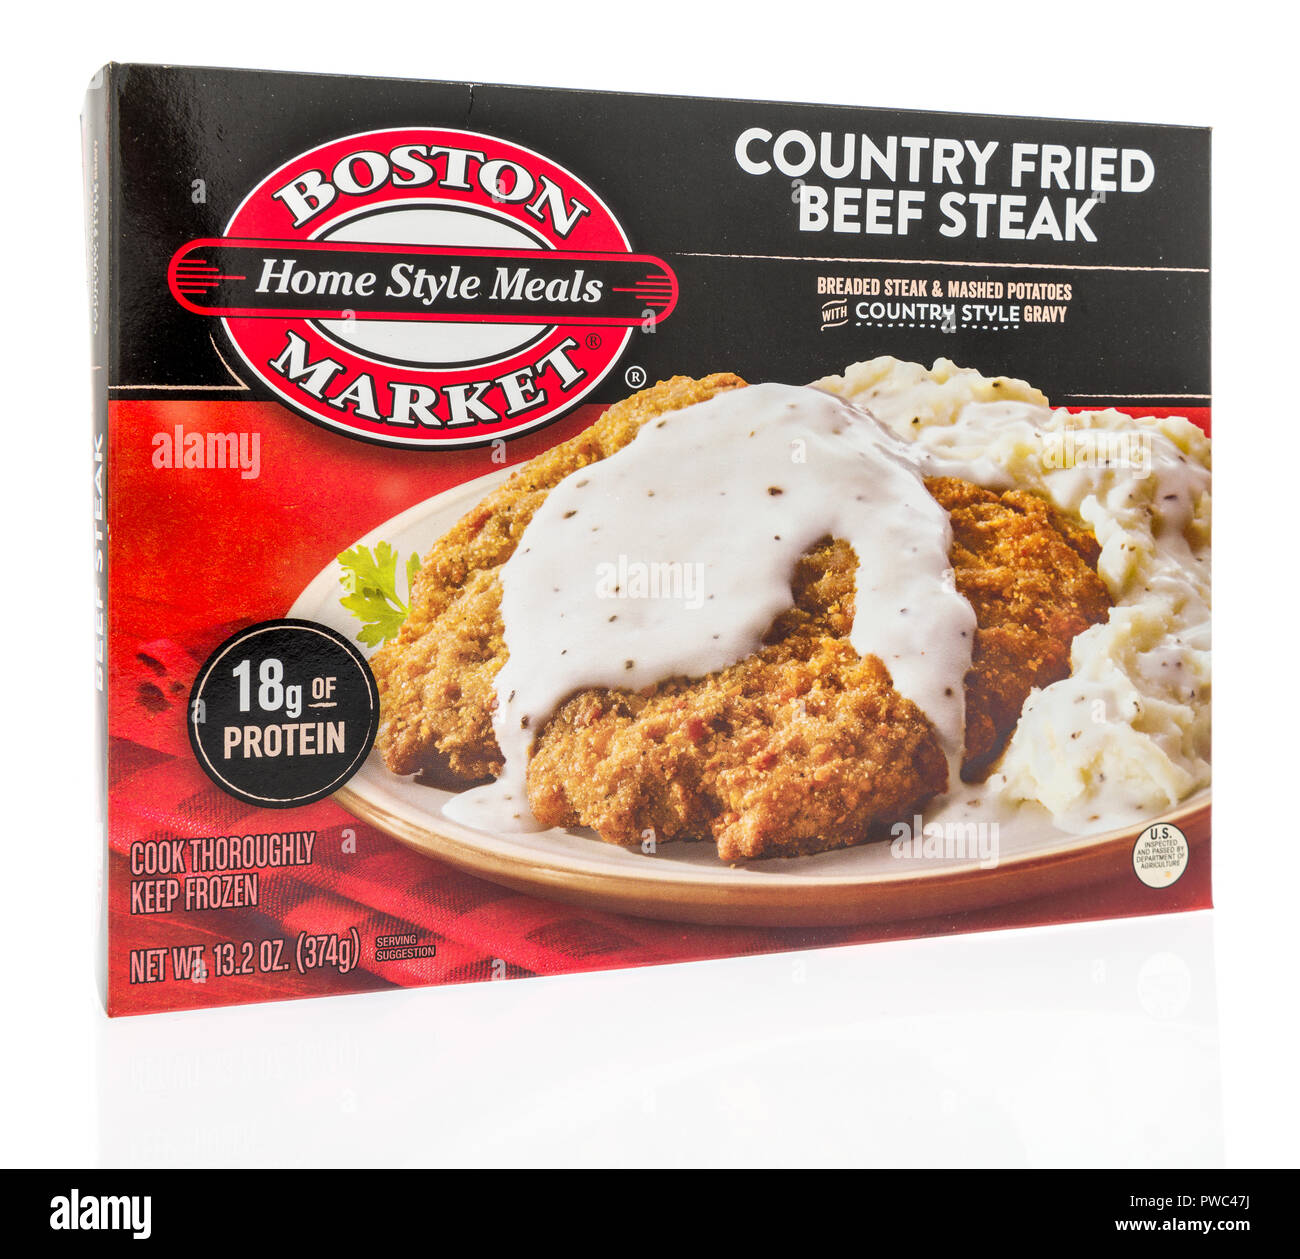 Winneconne, WI - 29 September 2018: A box of Boston Market home style meals in country fried beef steak on an isolated background Stock Photo